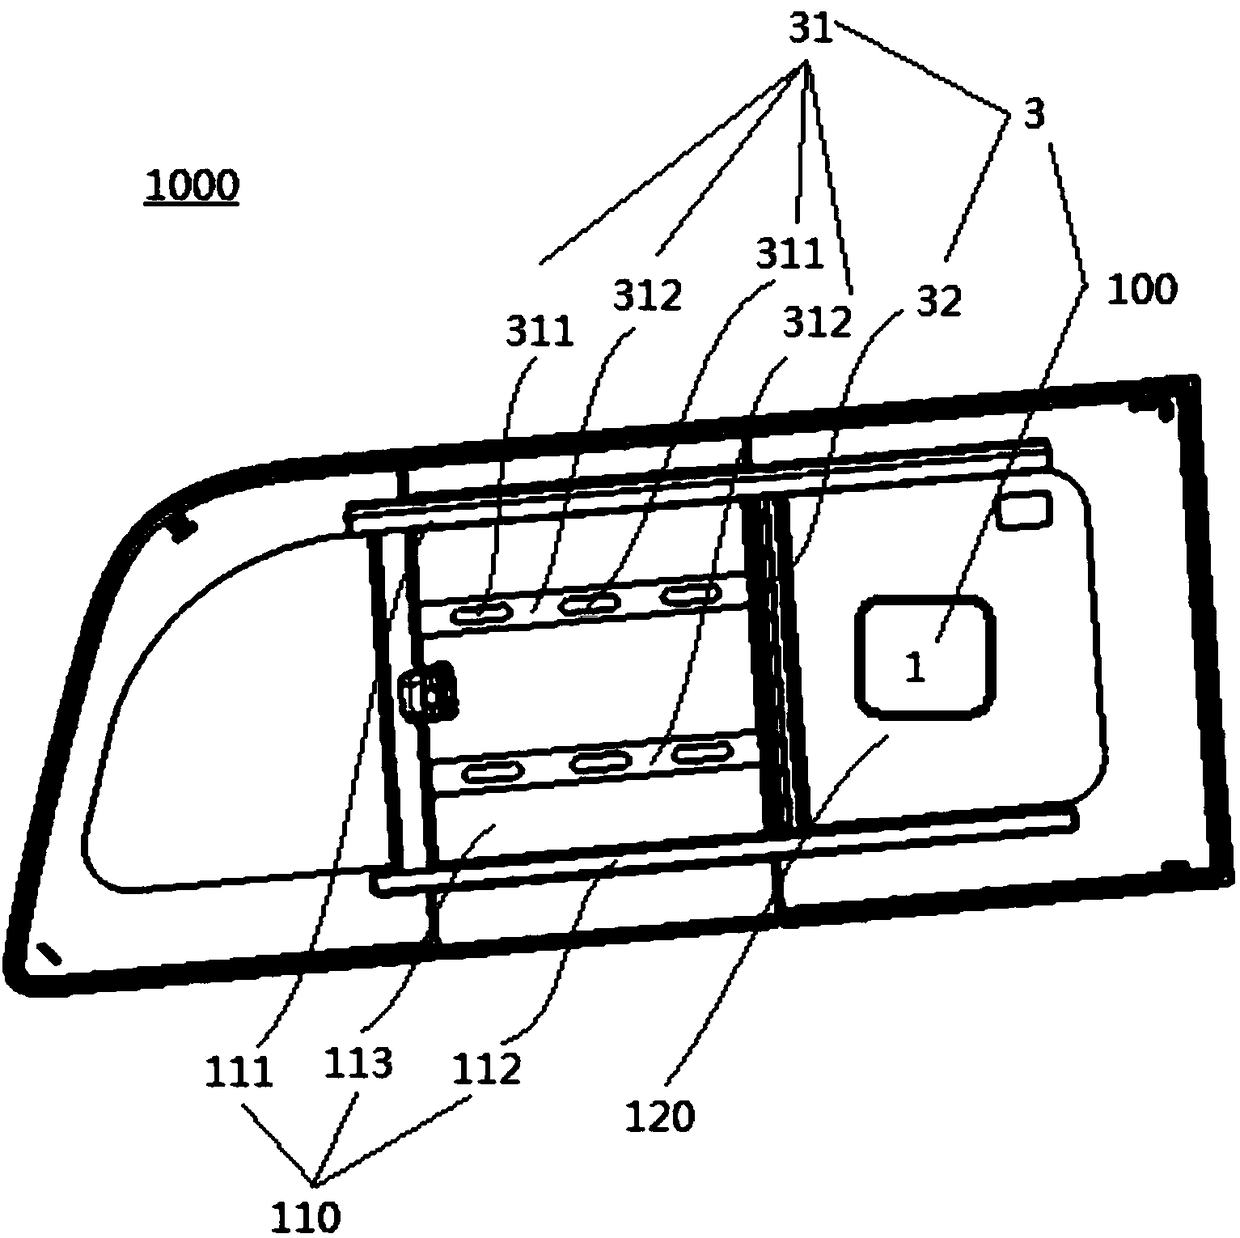 Protection device capable of preventing passenger from stretching out of vehicle window opening, vehicle window, and vehicle with vehicle window